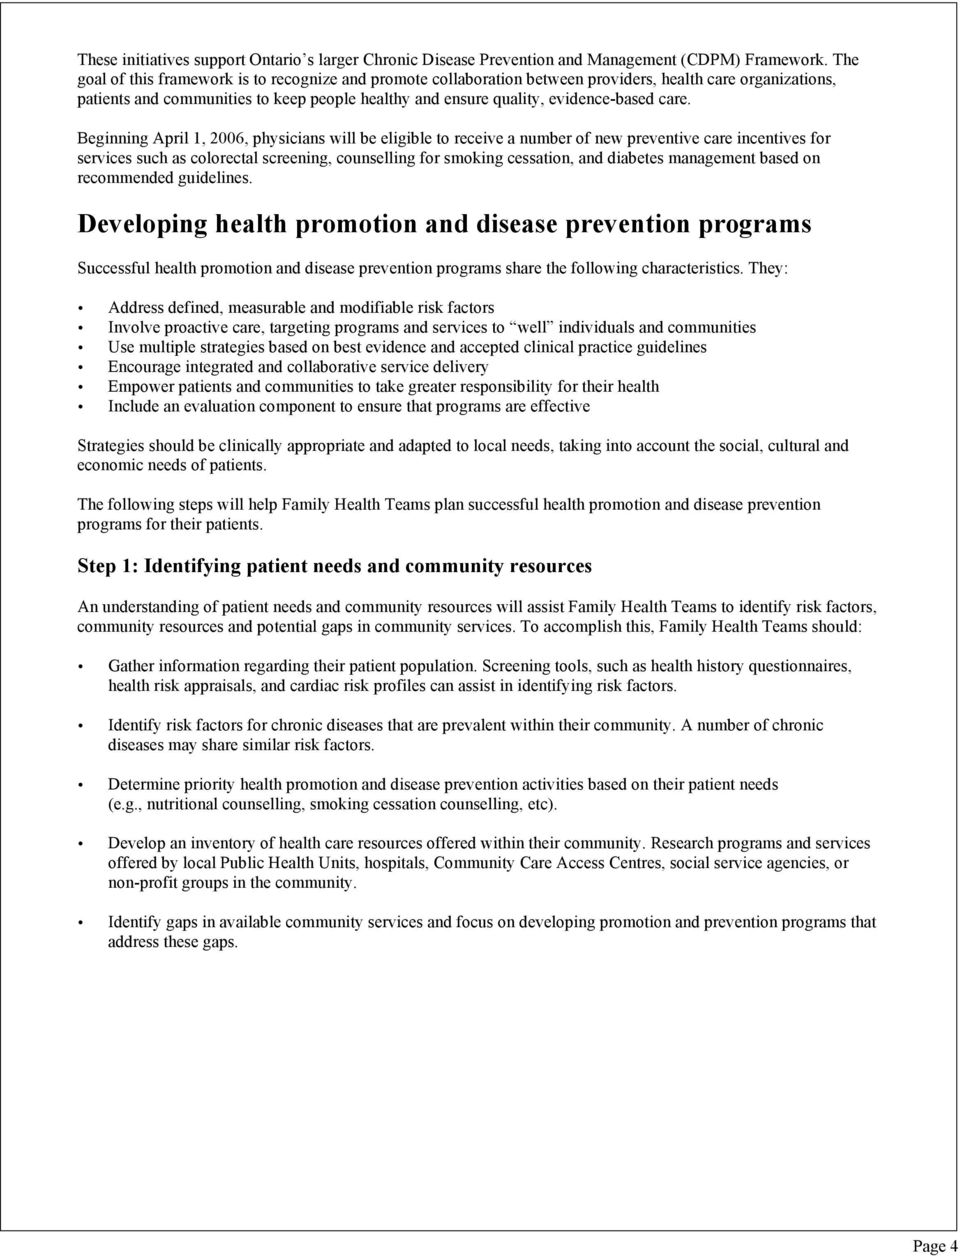 care. Beginning April 1, 2006, physicians will be eligible to receive a number of new preventive care incentives for services such as colorectal screening, counselling for smoking cessation, and